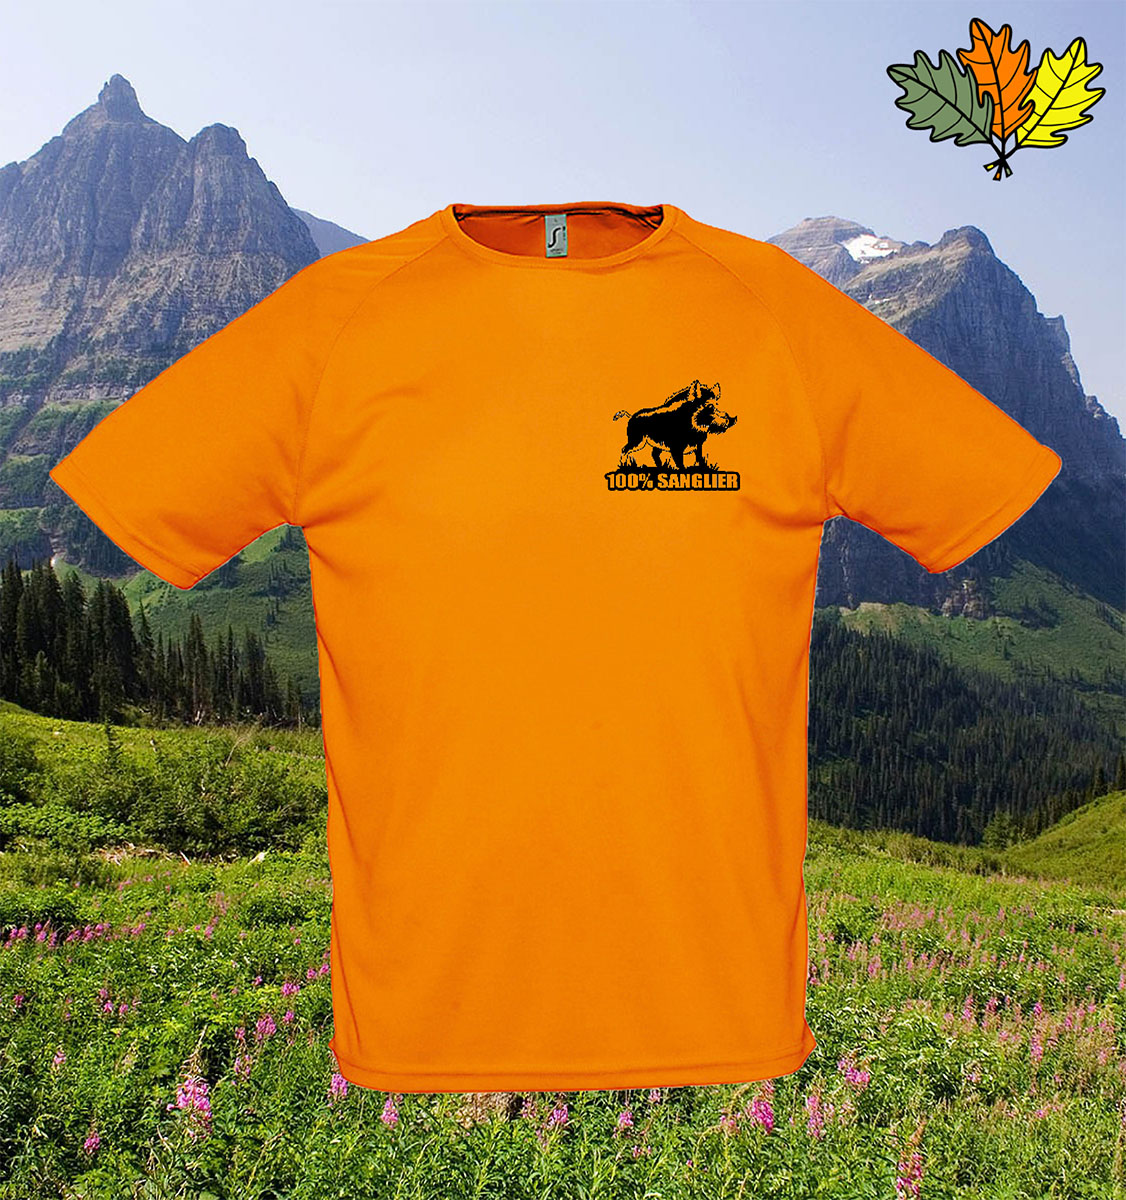 T-Shirt polyester fluo de chasse 100%